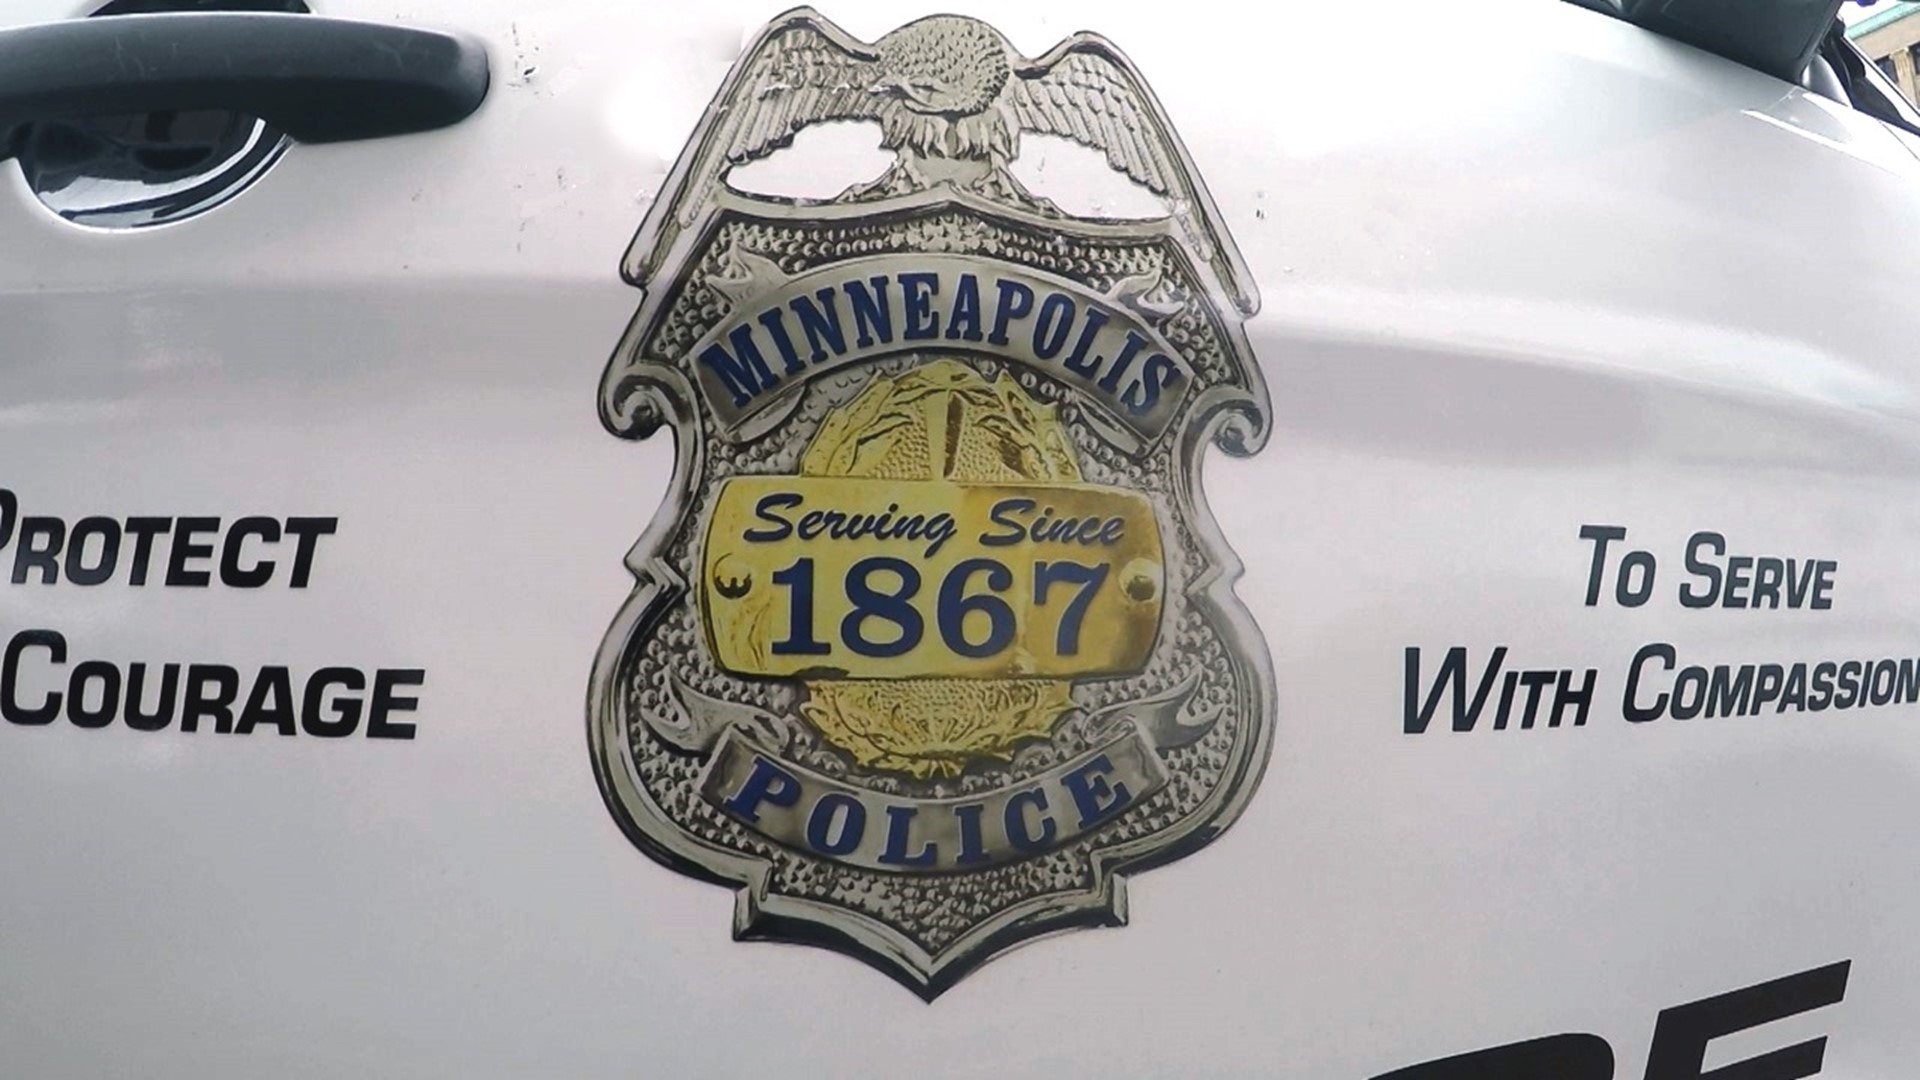 The Minneapolis Police Department will remain the primary law enforcement agency across the city after its residents voted against ballot question 2.